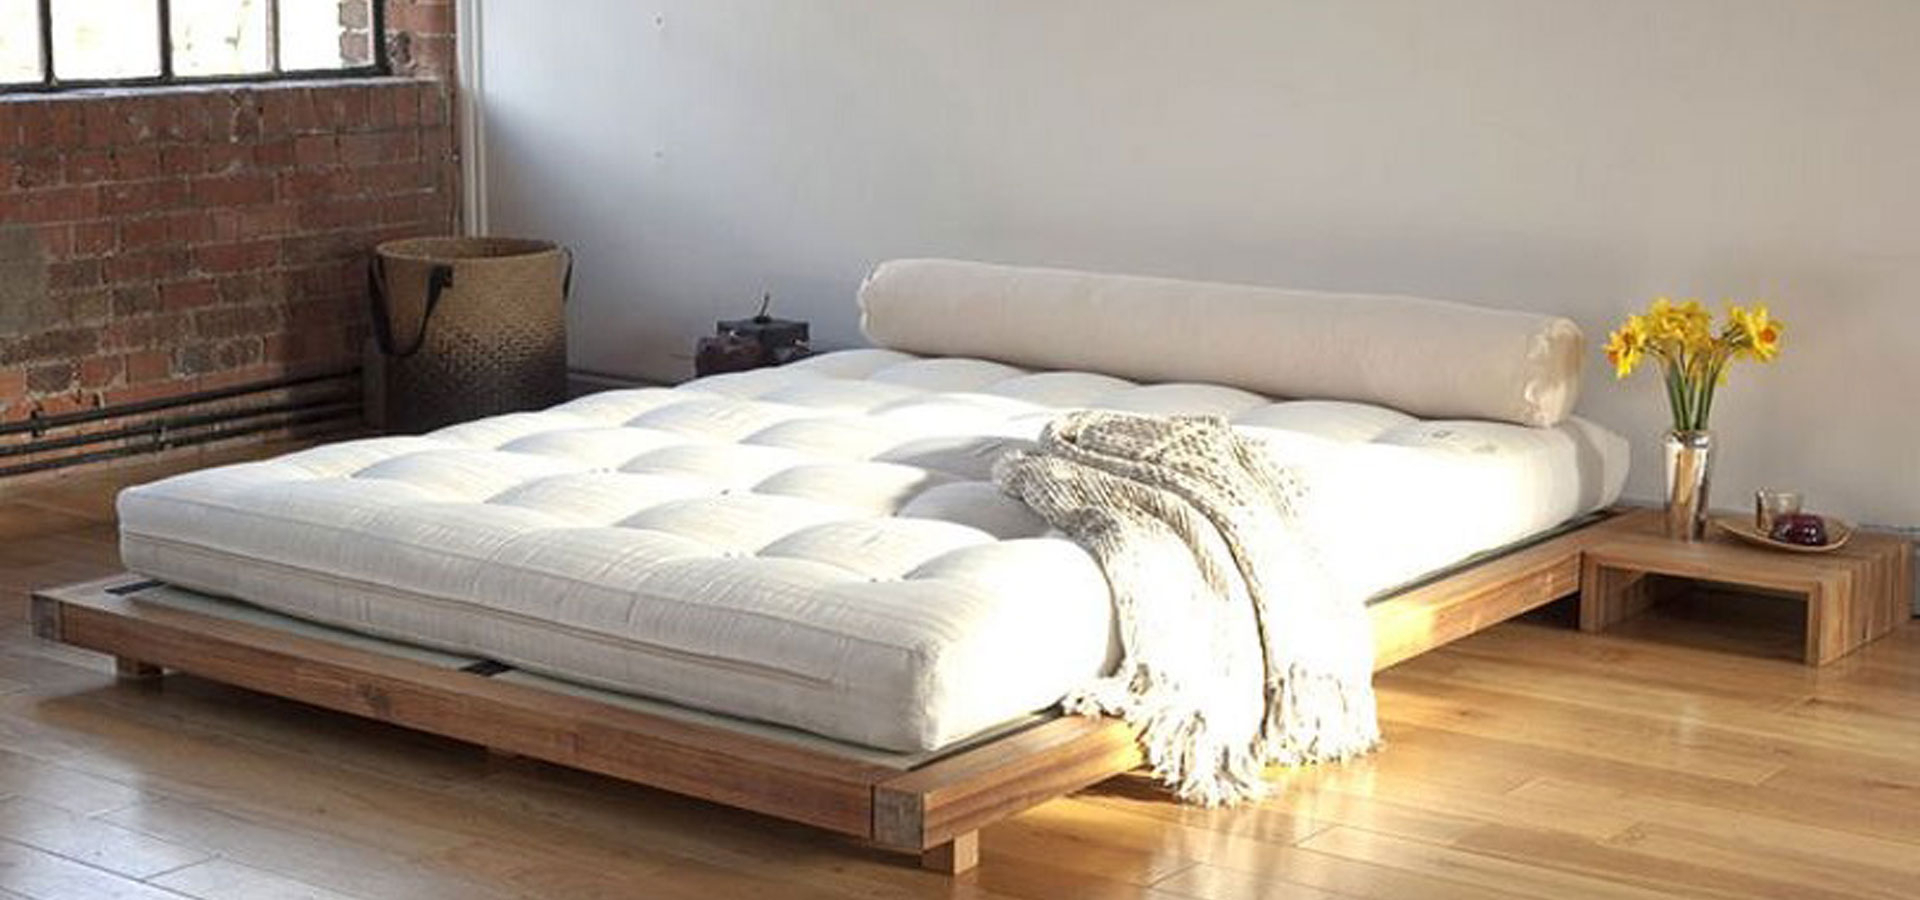 Low Profile King Bed Ideas On Foter